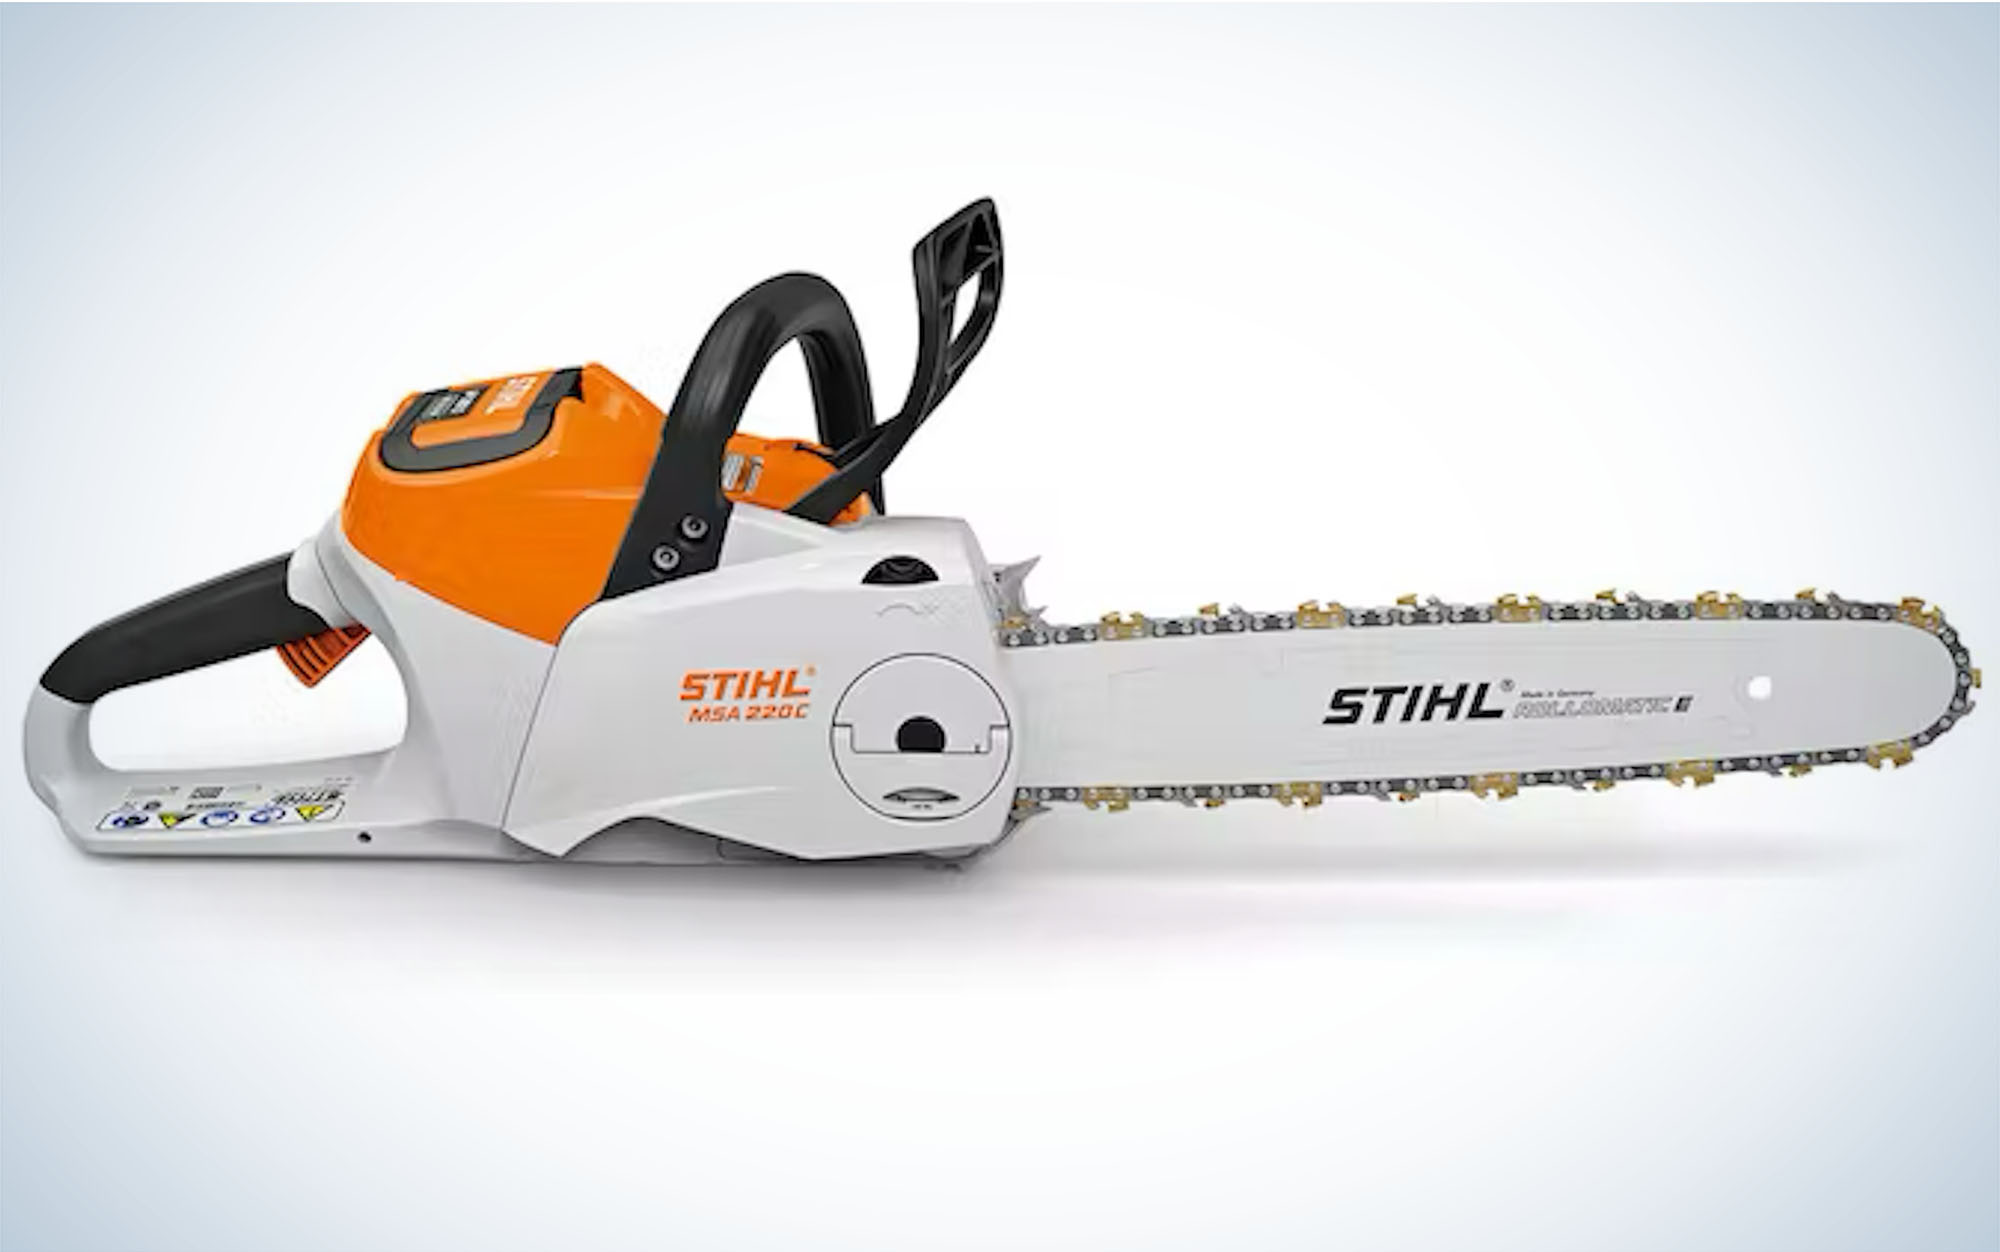 The Stihl MSA 220 C-B is one of the best electric chainsaws.